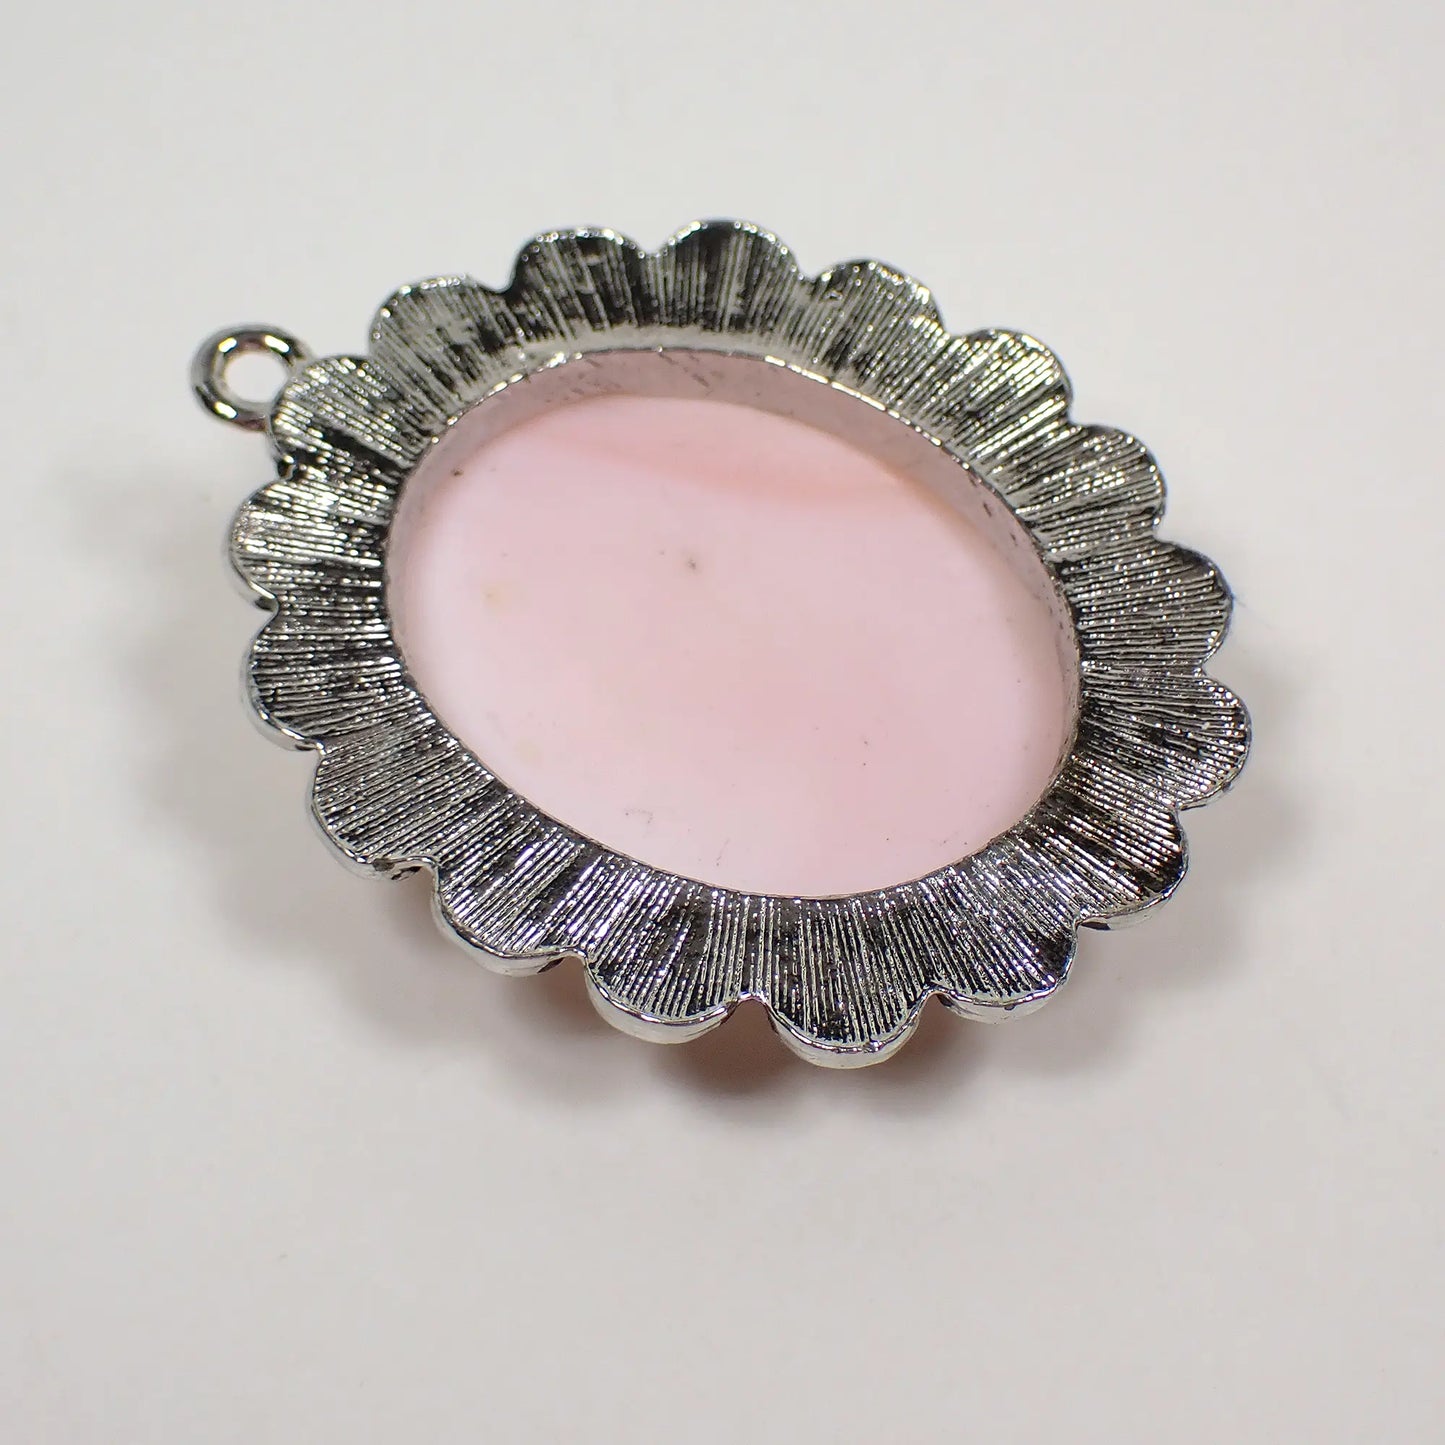 1970's Light Pink and White Glass Vintage Cameo Pendant